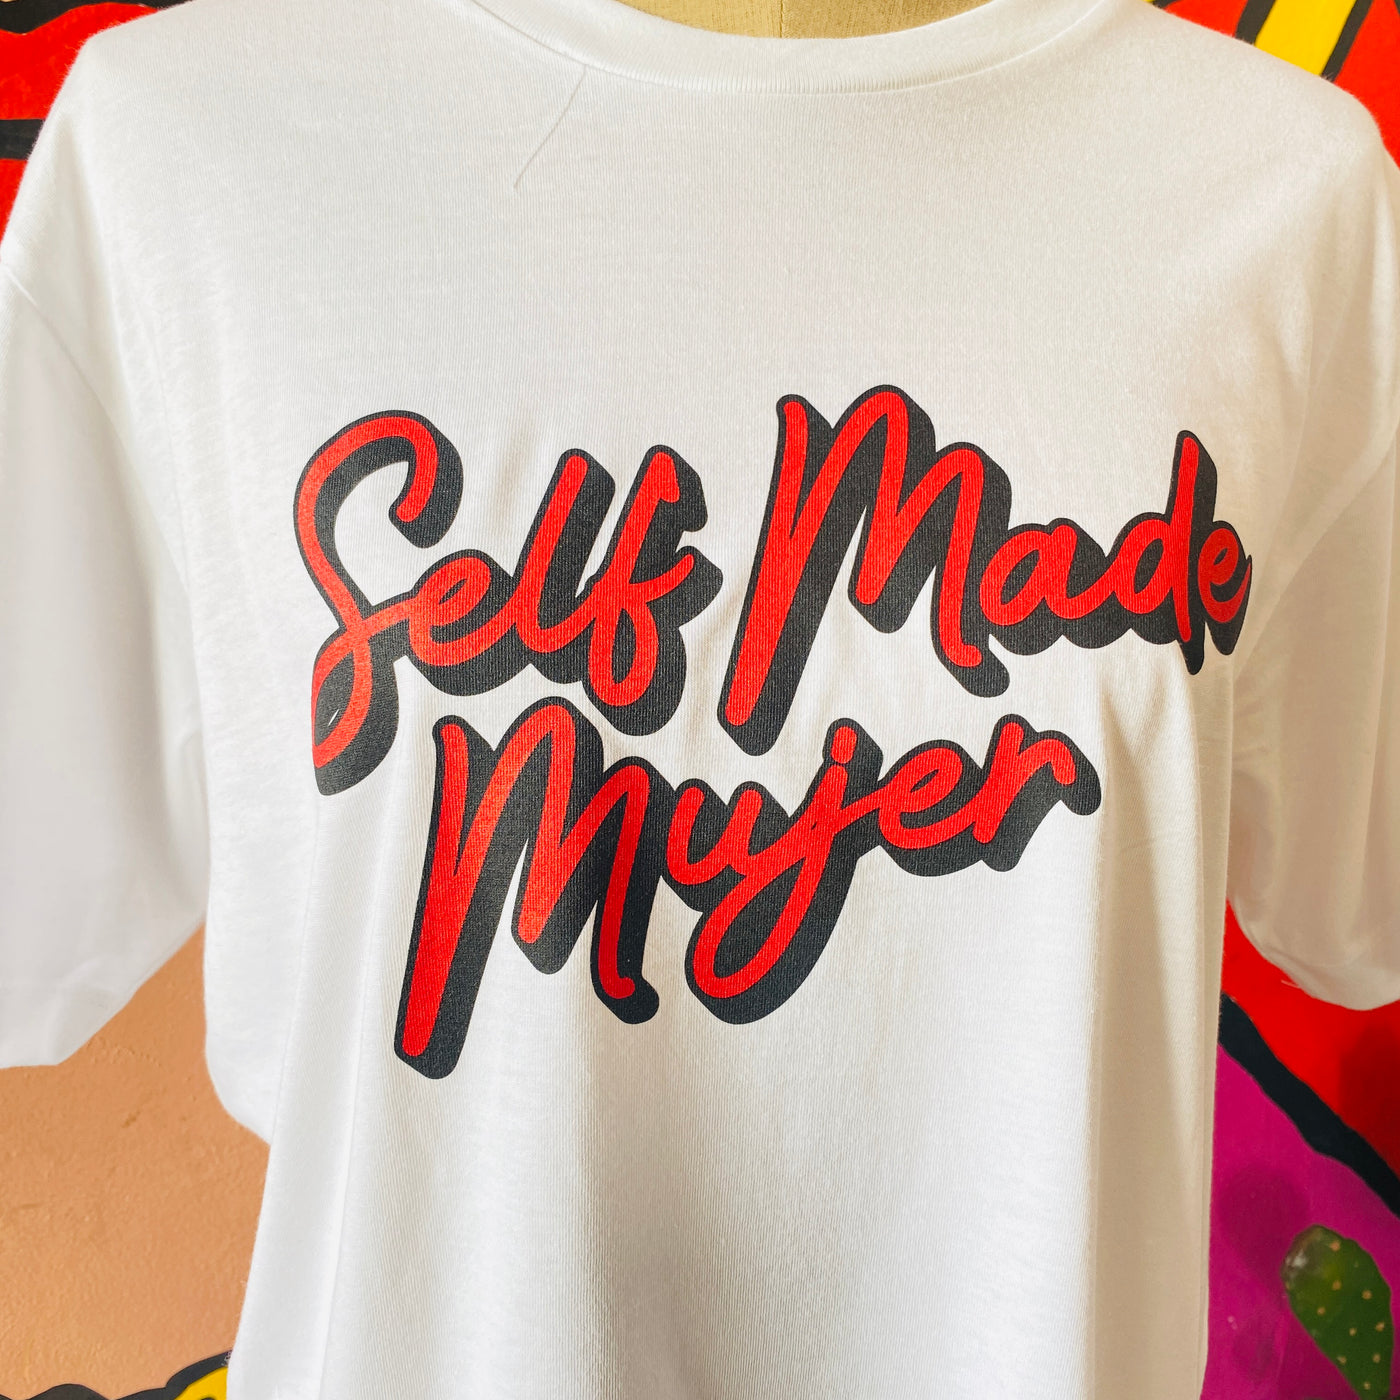 Close up of white, "Self Made Mujer" phrase t-shirt with red detail.